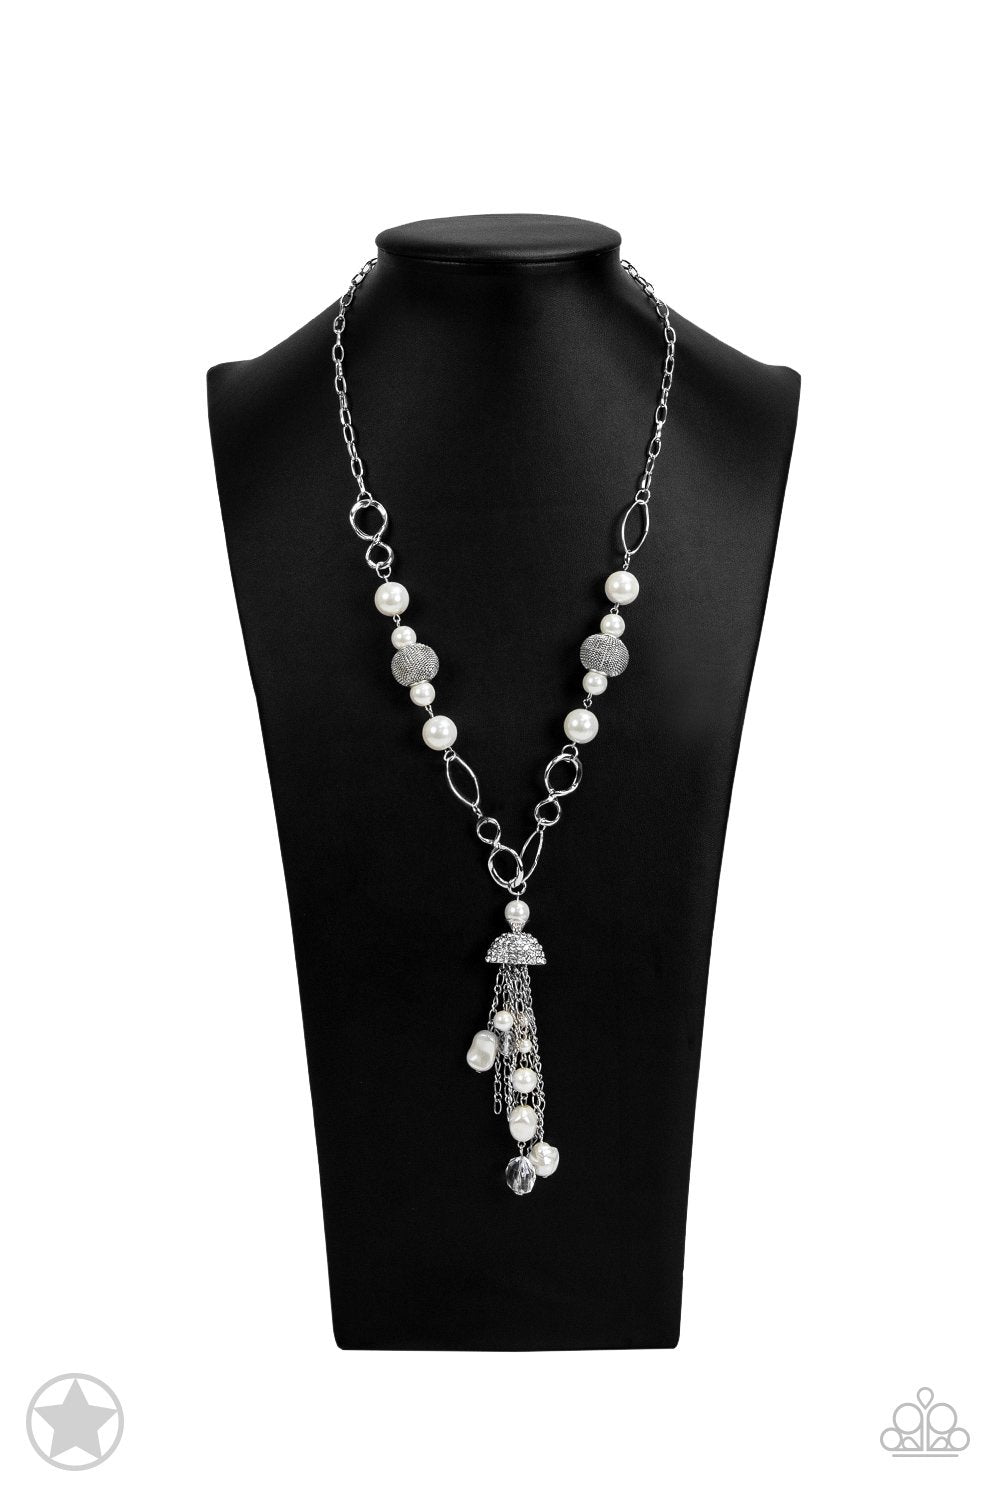 Designated Diva Long White Tassel Necklace and matching Earrings - Paparazzi Accessories- on bust -CarasShop.com - $5 Jewelry by Cara Jewels